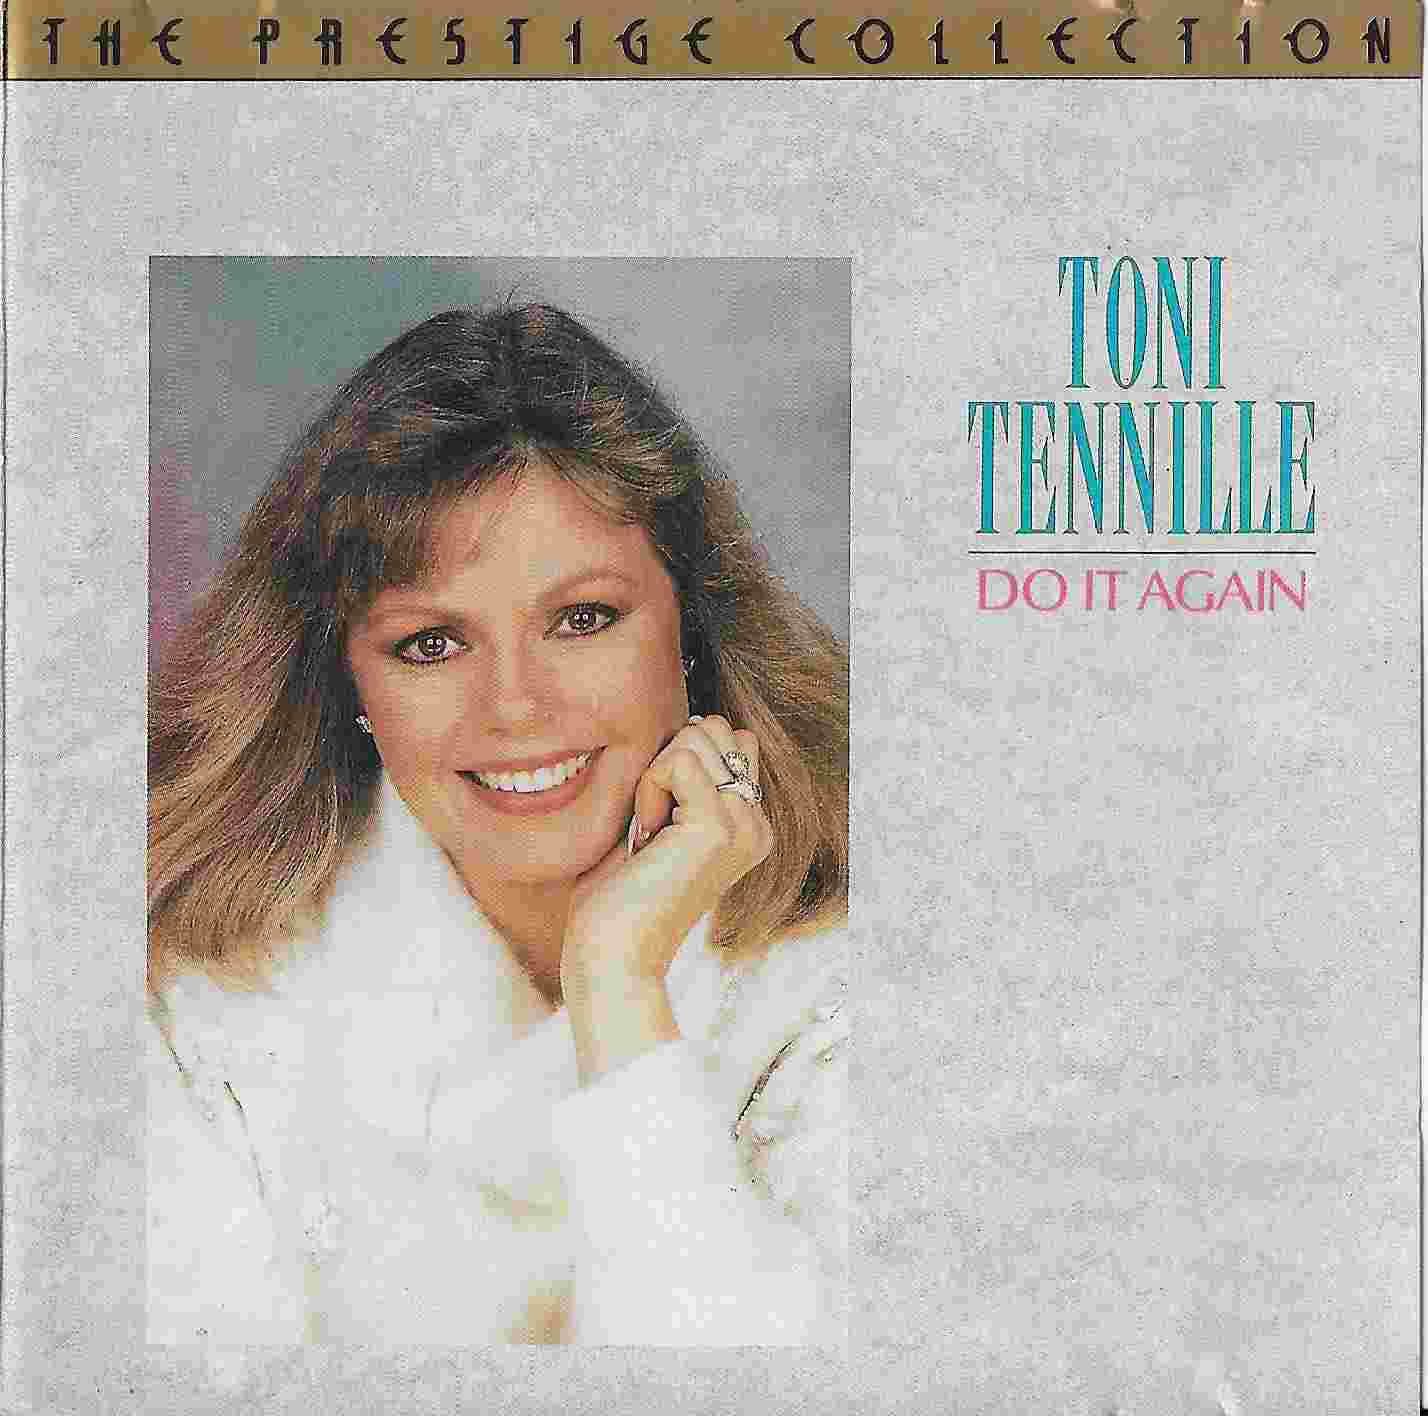 Picture of CDPC 5006 Do it again - Toni Tennille by artist Toni Tennille from the BBC cds - Records and Tapes library